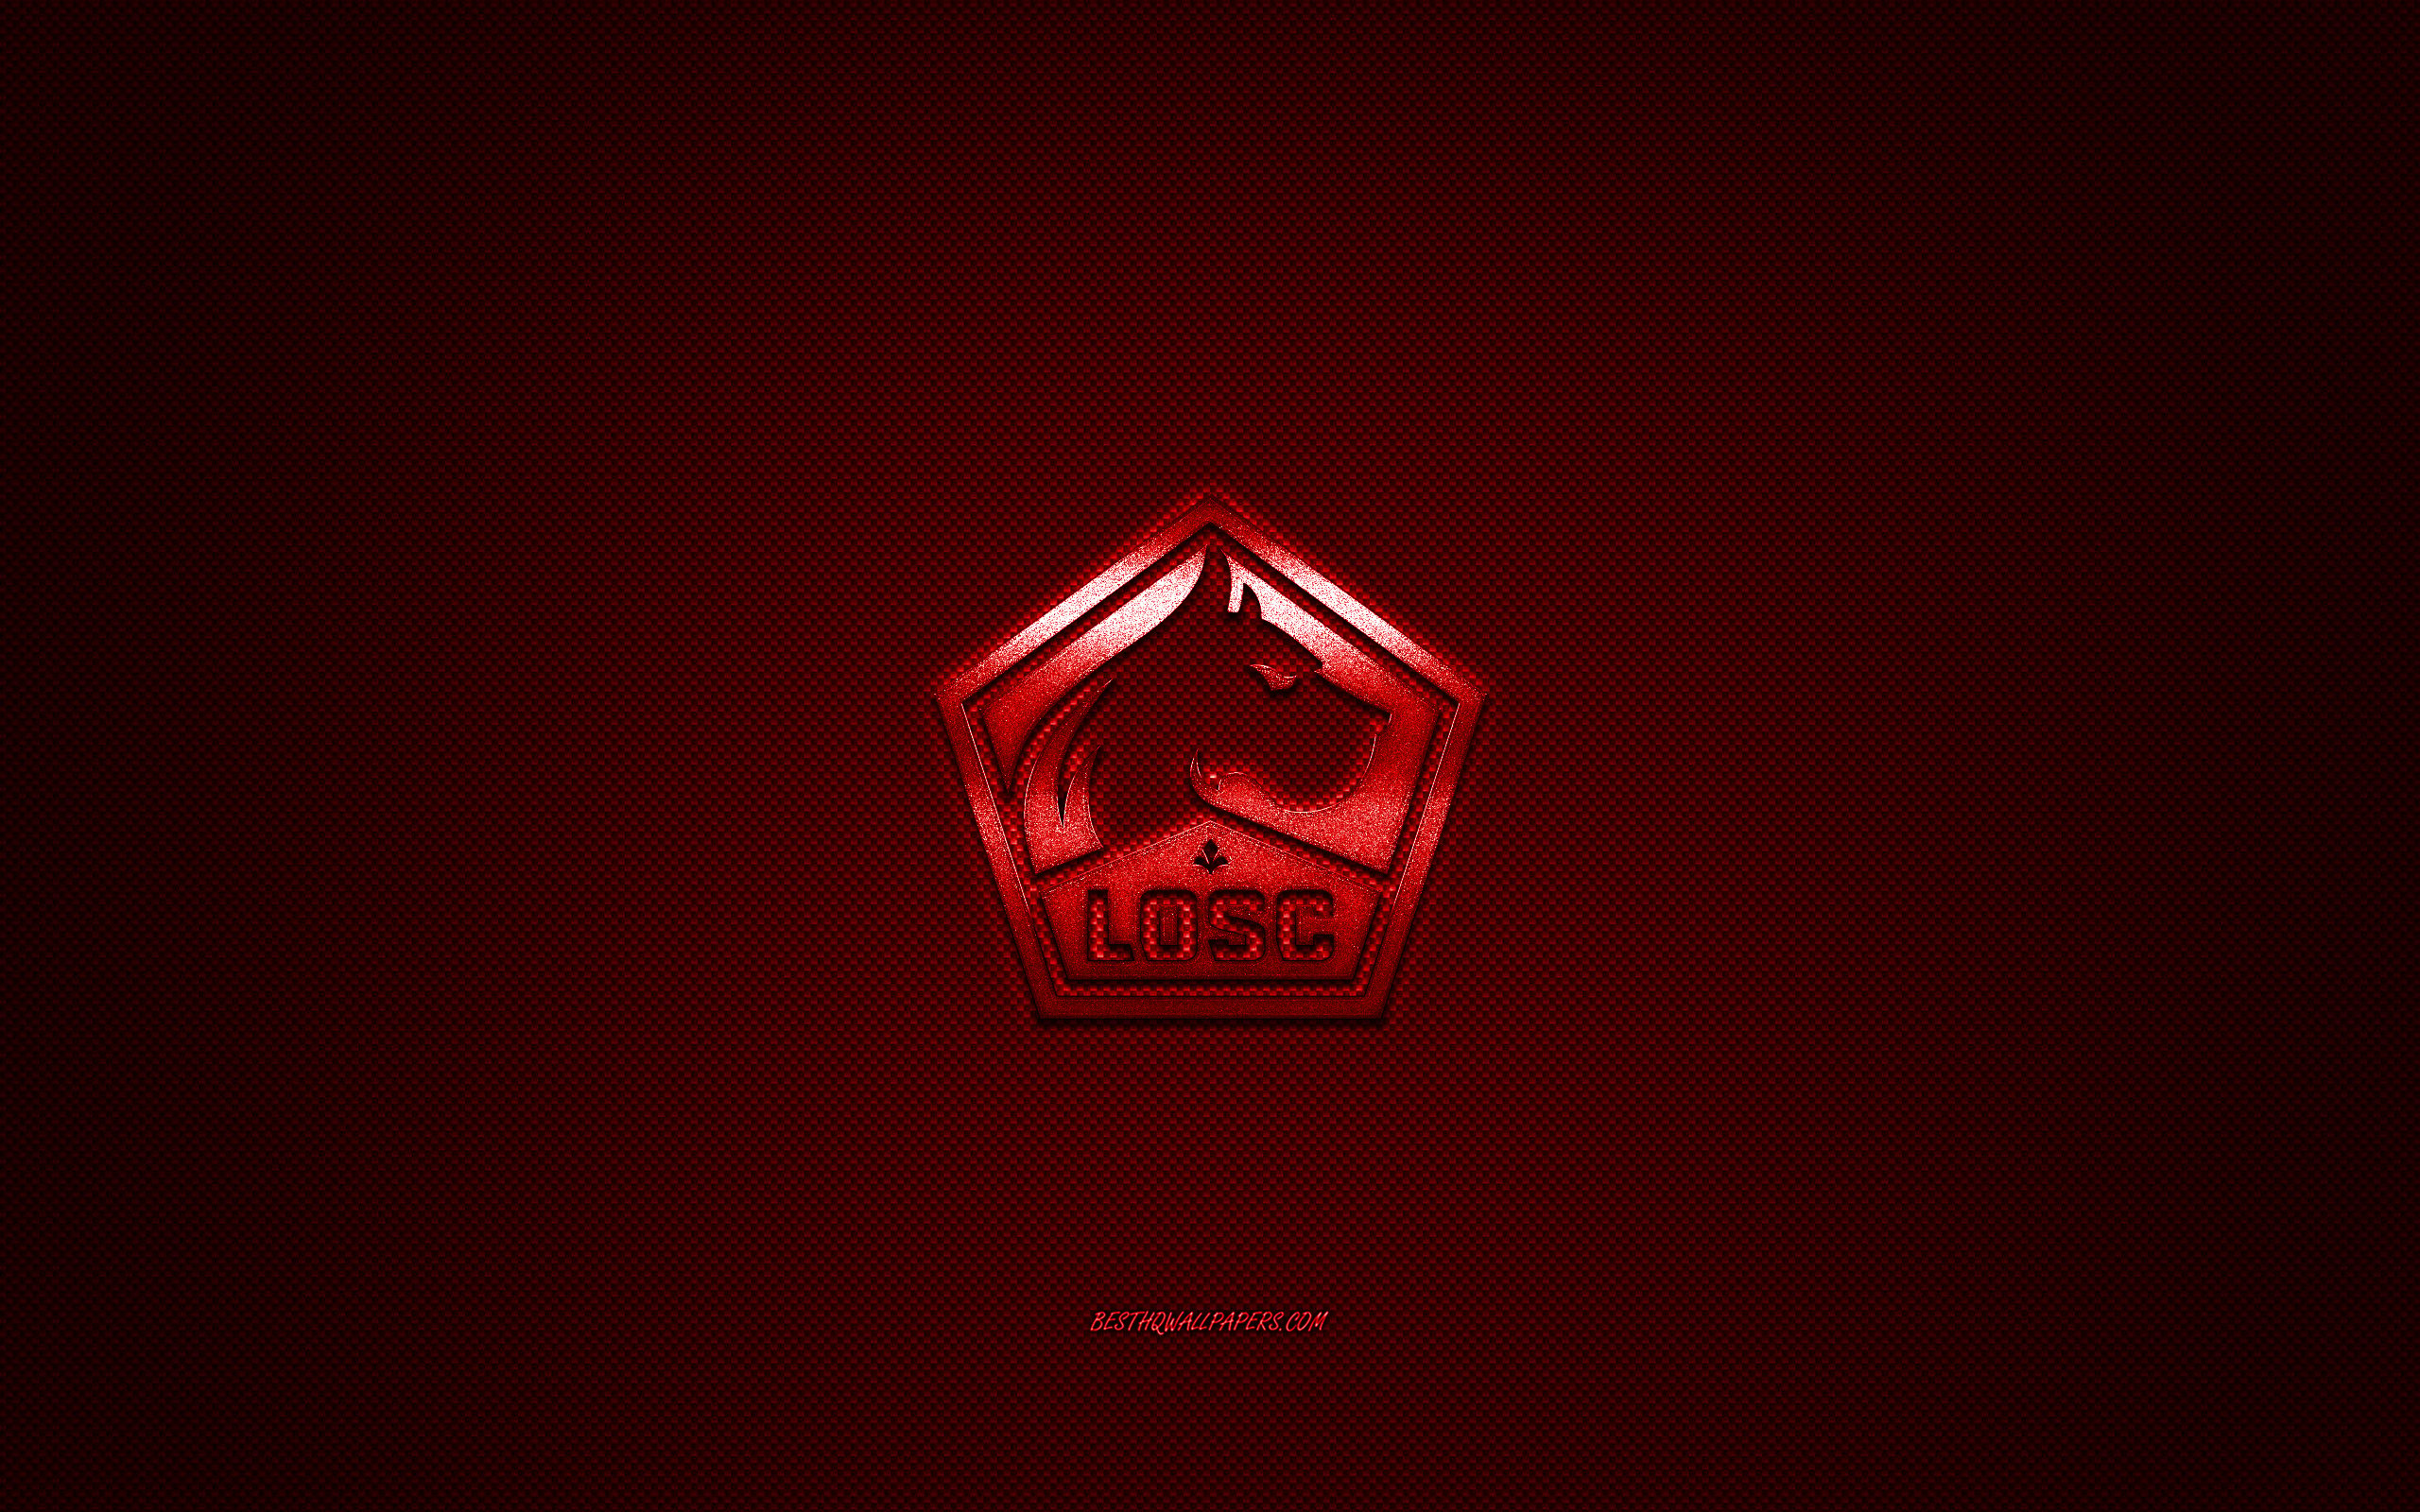 Download wallpaper LOSC Lille, French football club, Ligue Red logo, Red carbon fiber background, football, Lille, France, LOSC Lille logo for desktop with resolution 2560x1600. High Quality HD picture wallpaper